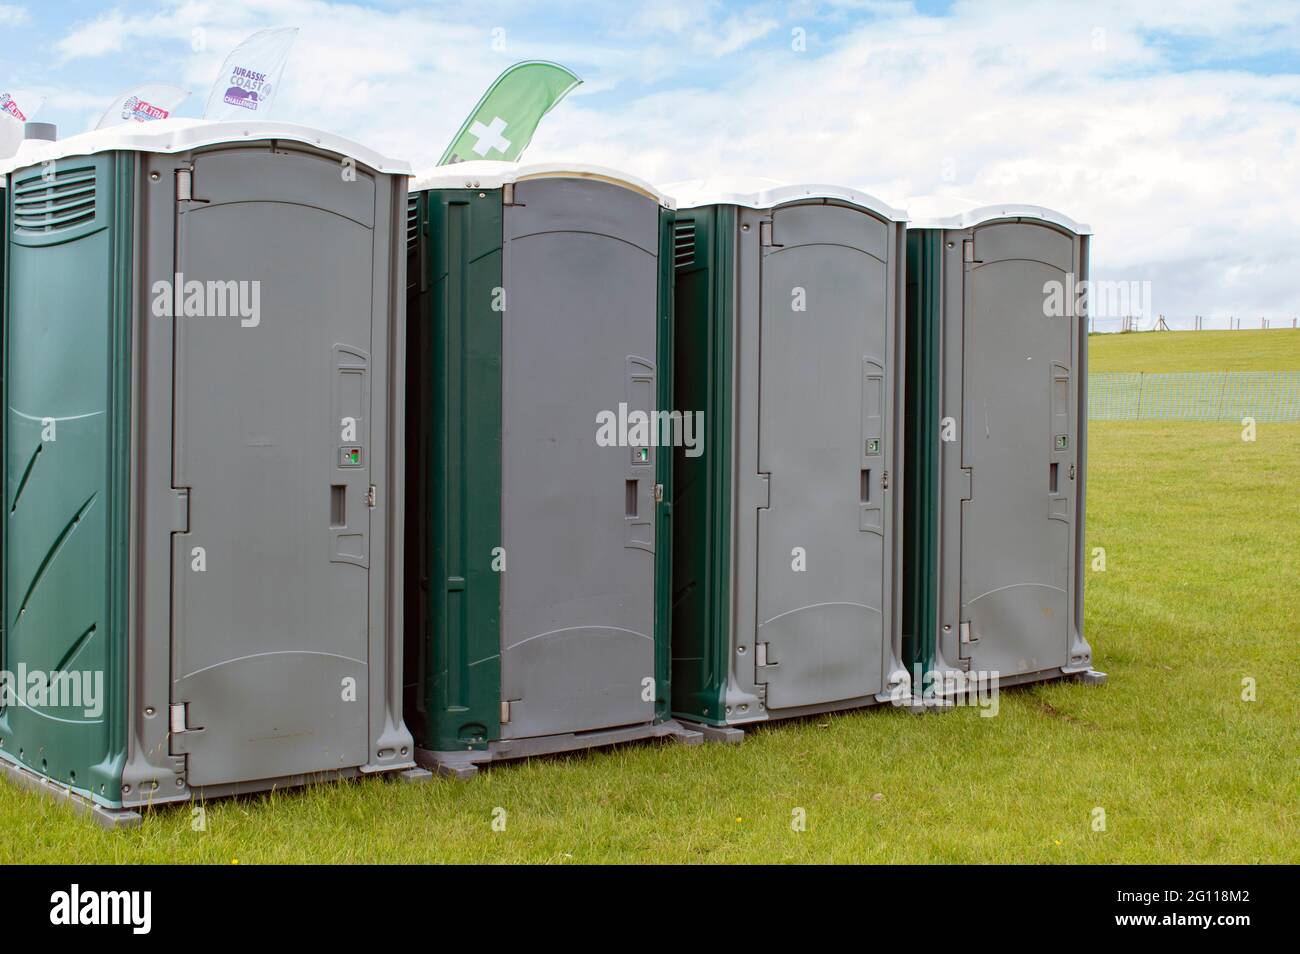 Portable toilets at an outdoor event Stock Photo